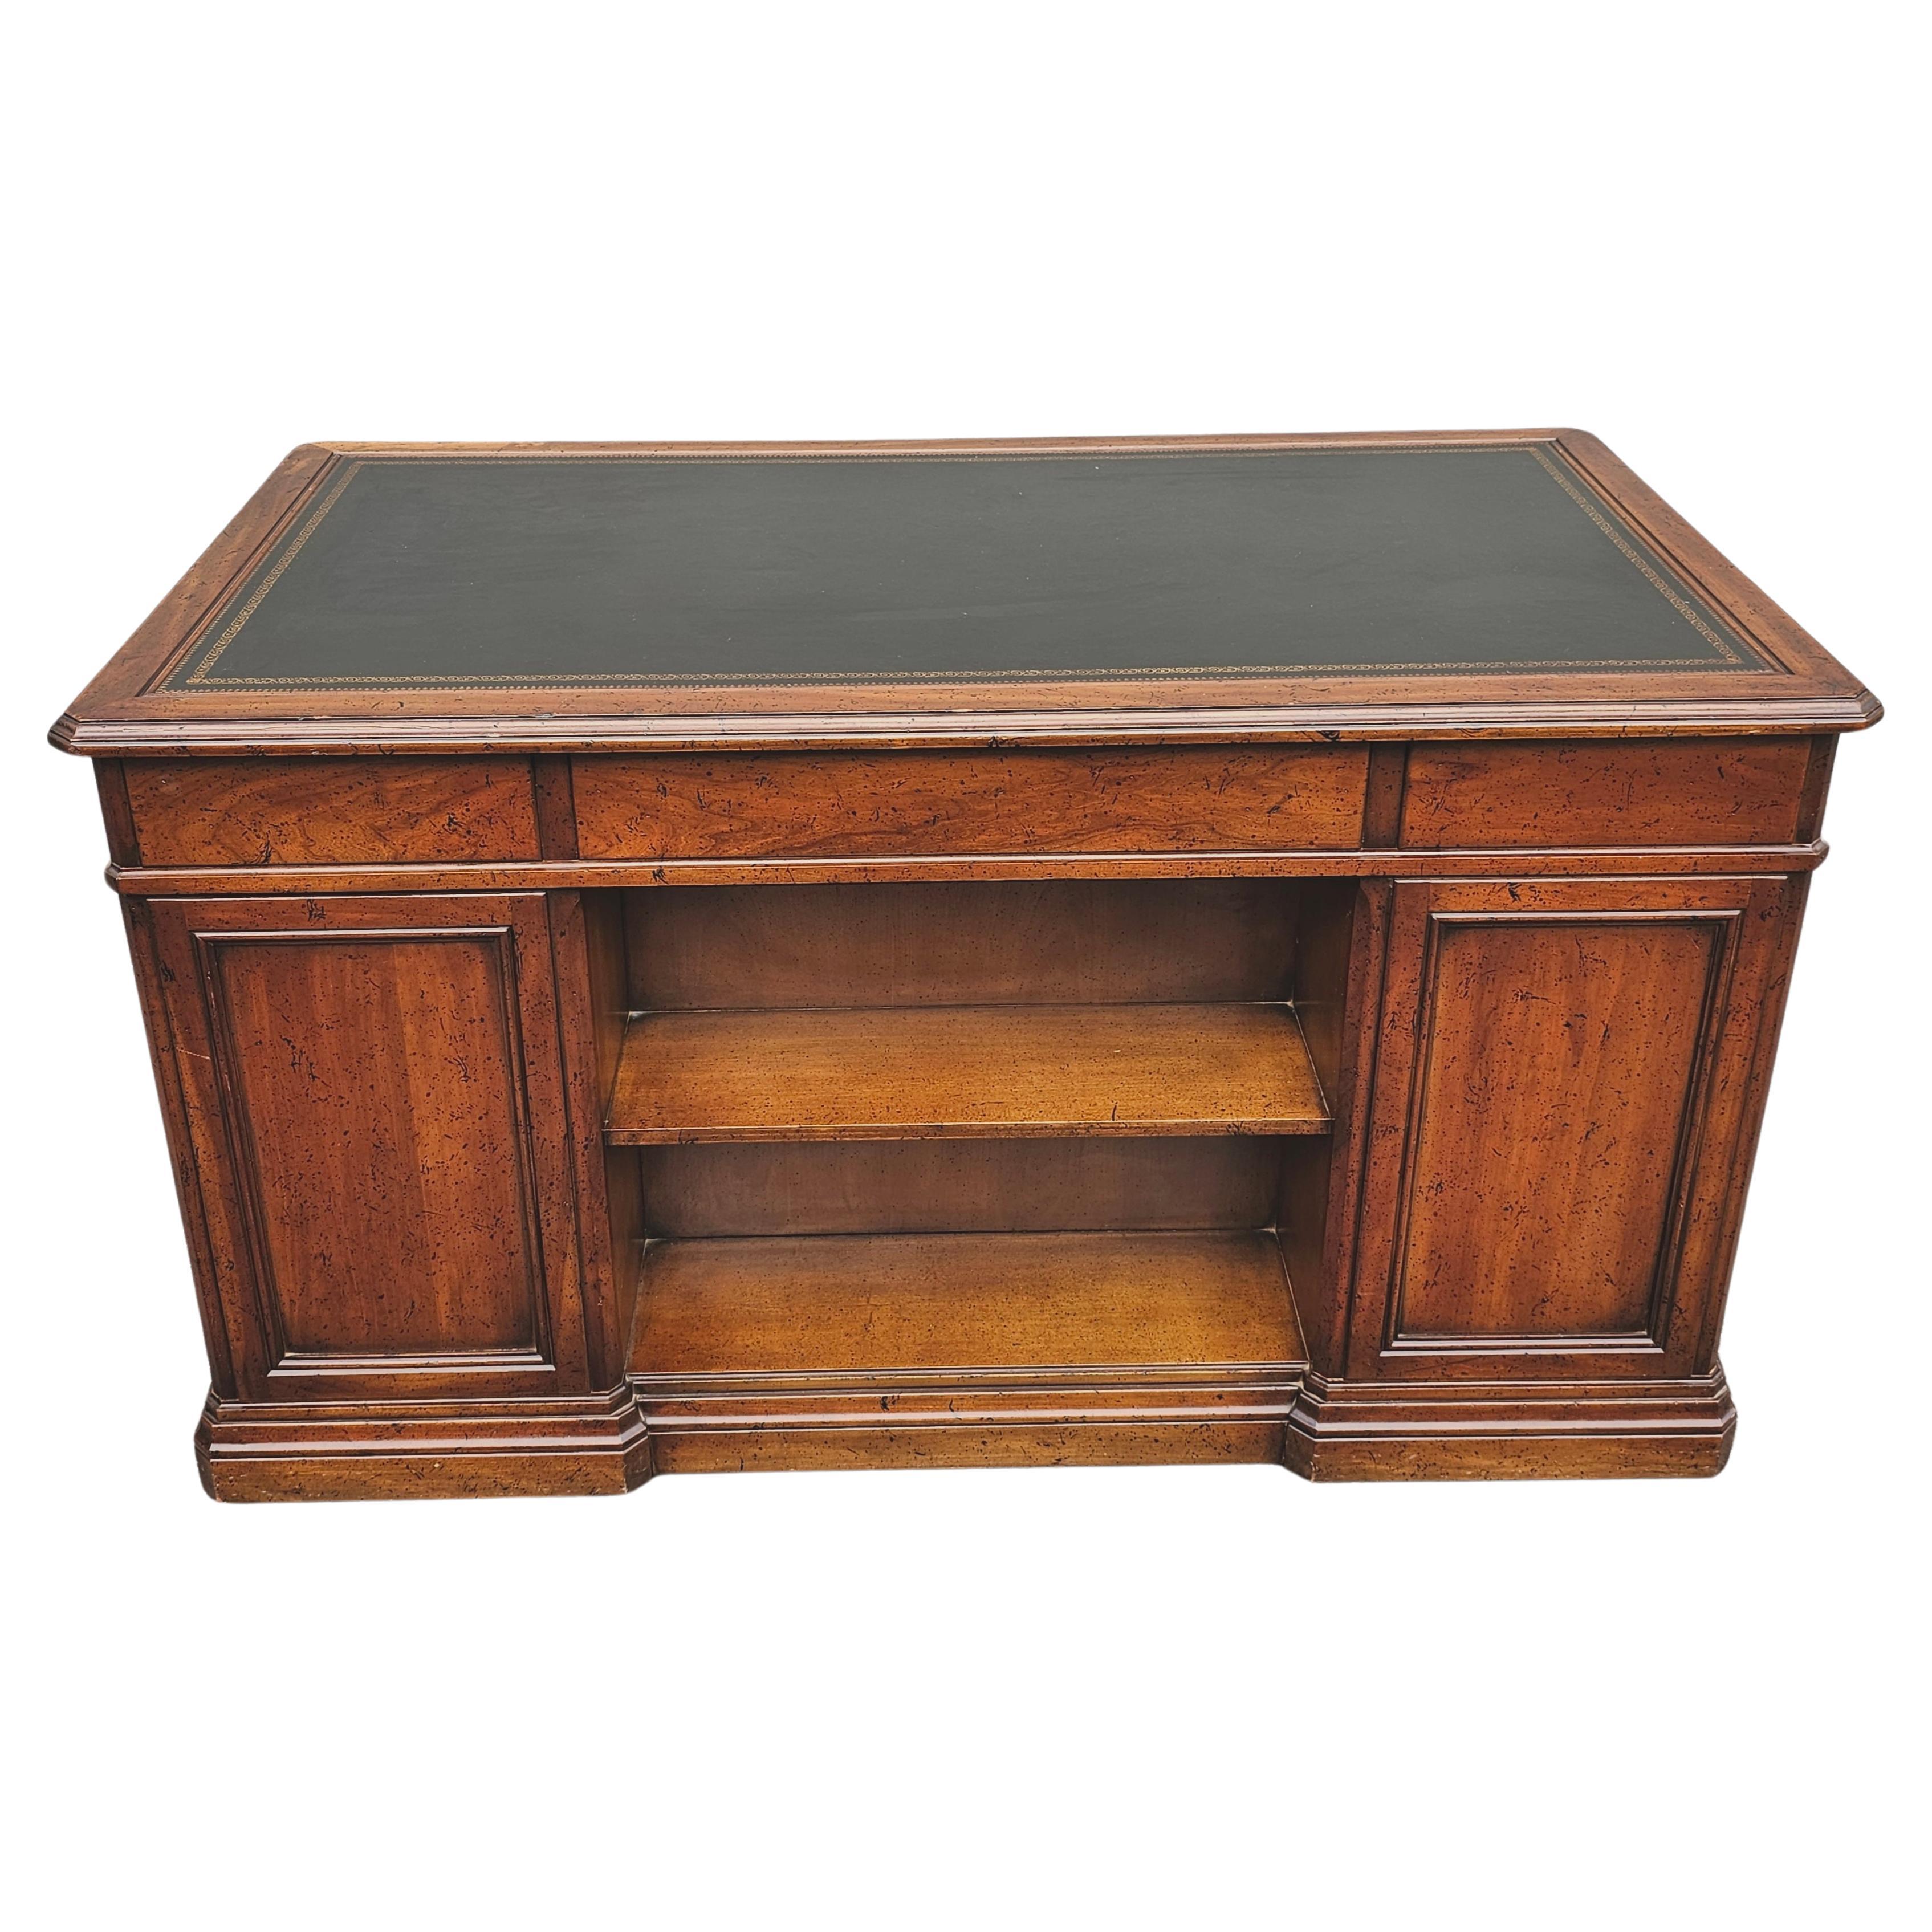 1965 Sligh Lowry Distressed Walnut and Tooled Leather Executive Desk Bookcase In Good Condition For Sale In Germantown, MD